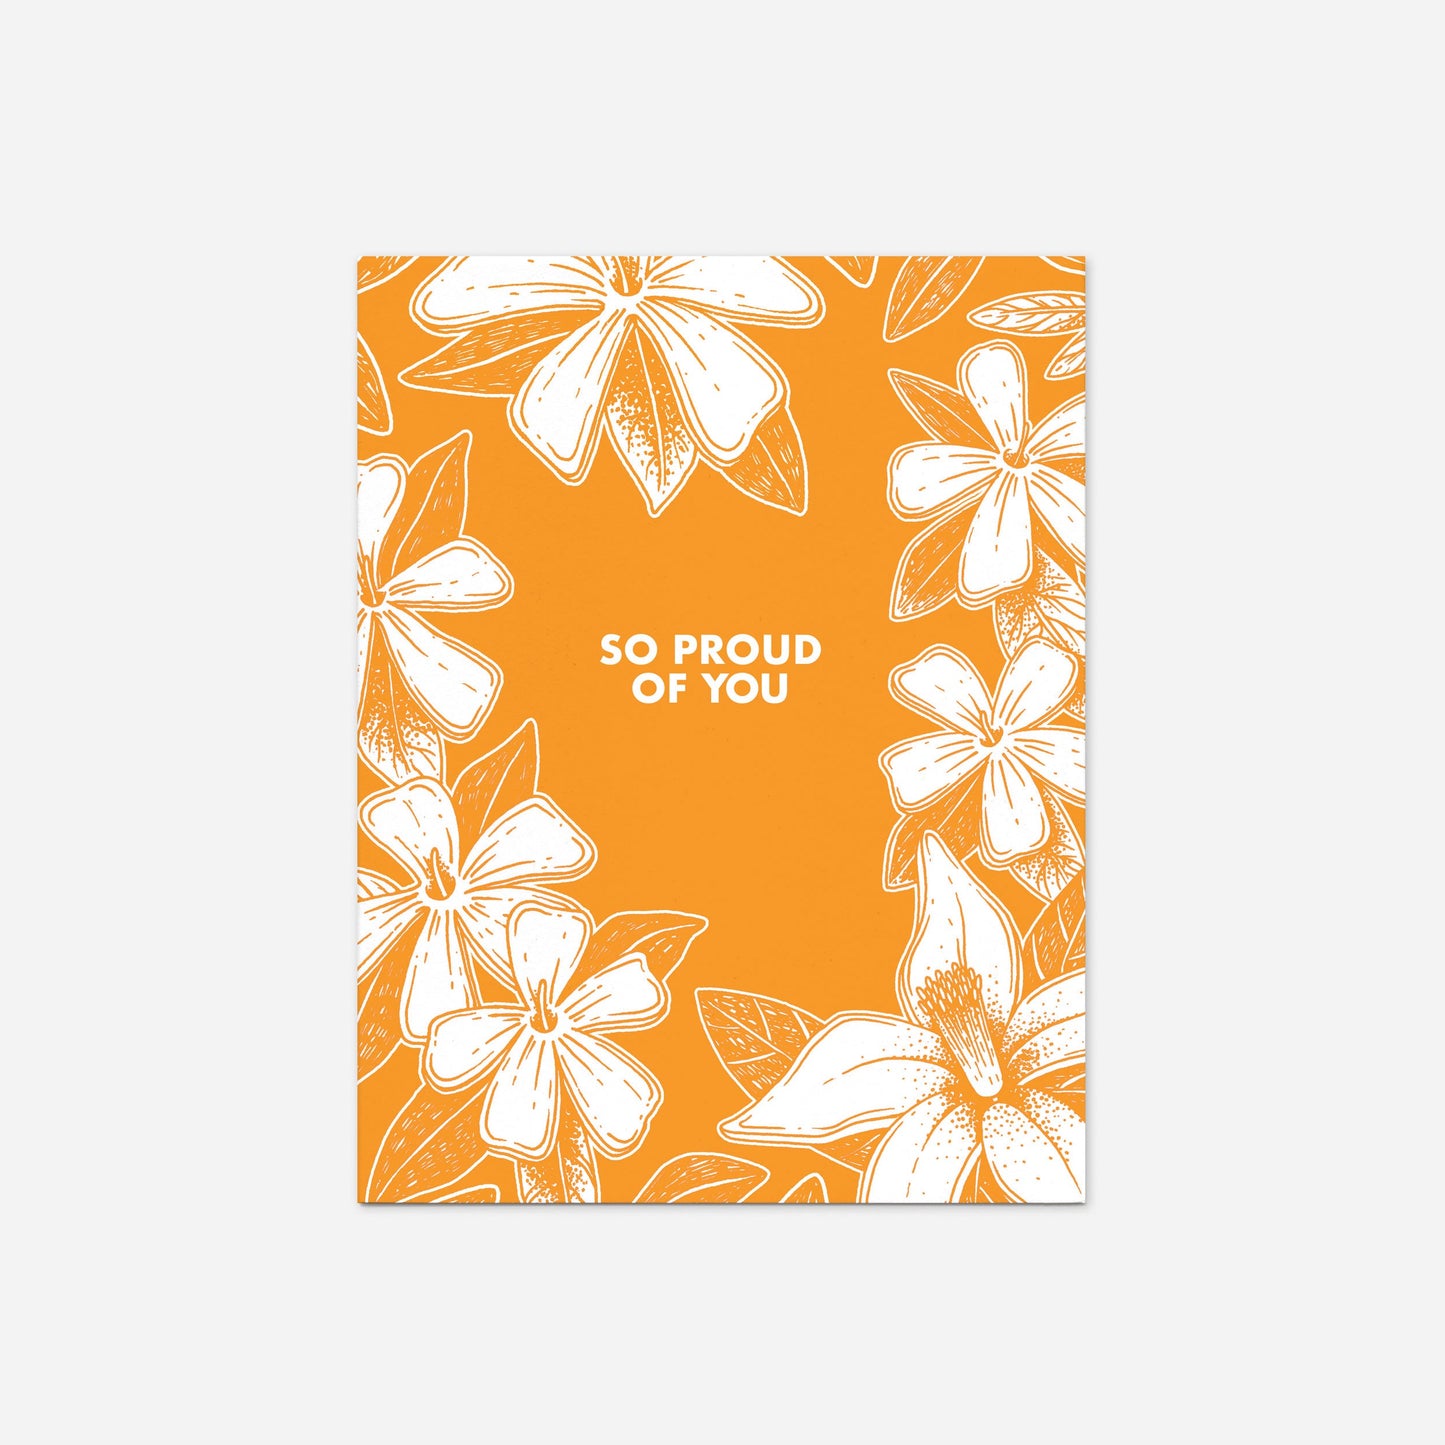 Set of 8 of "So Proud Of You" Greeting Cards